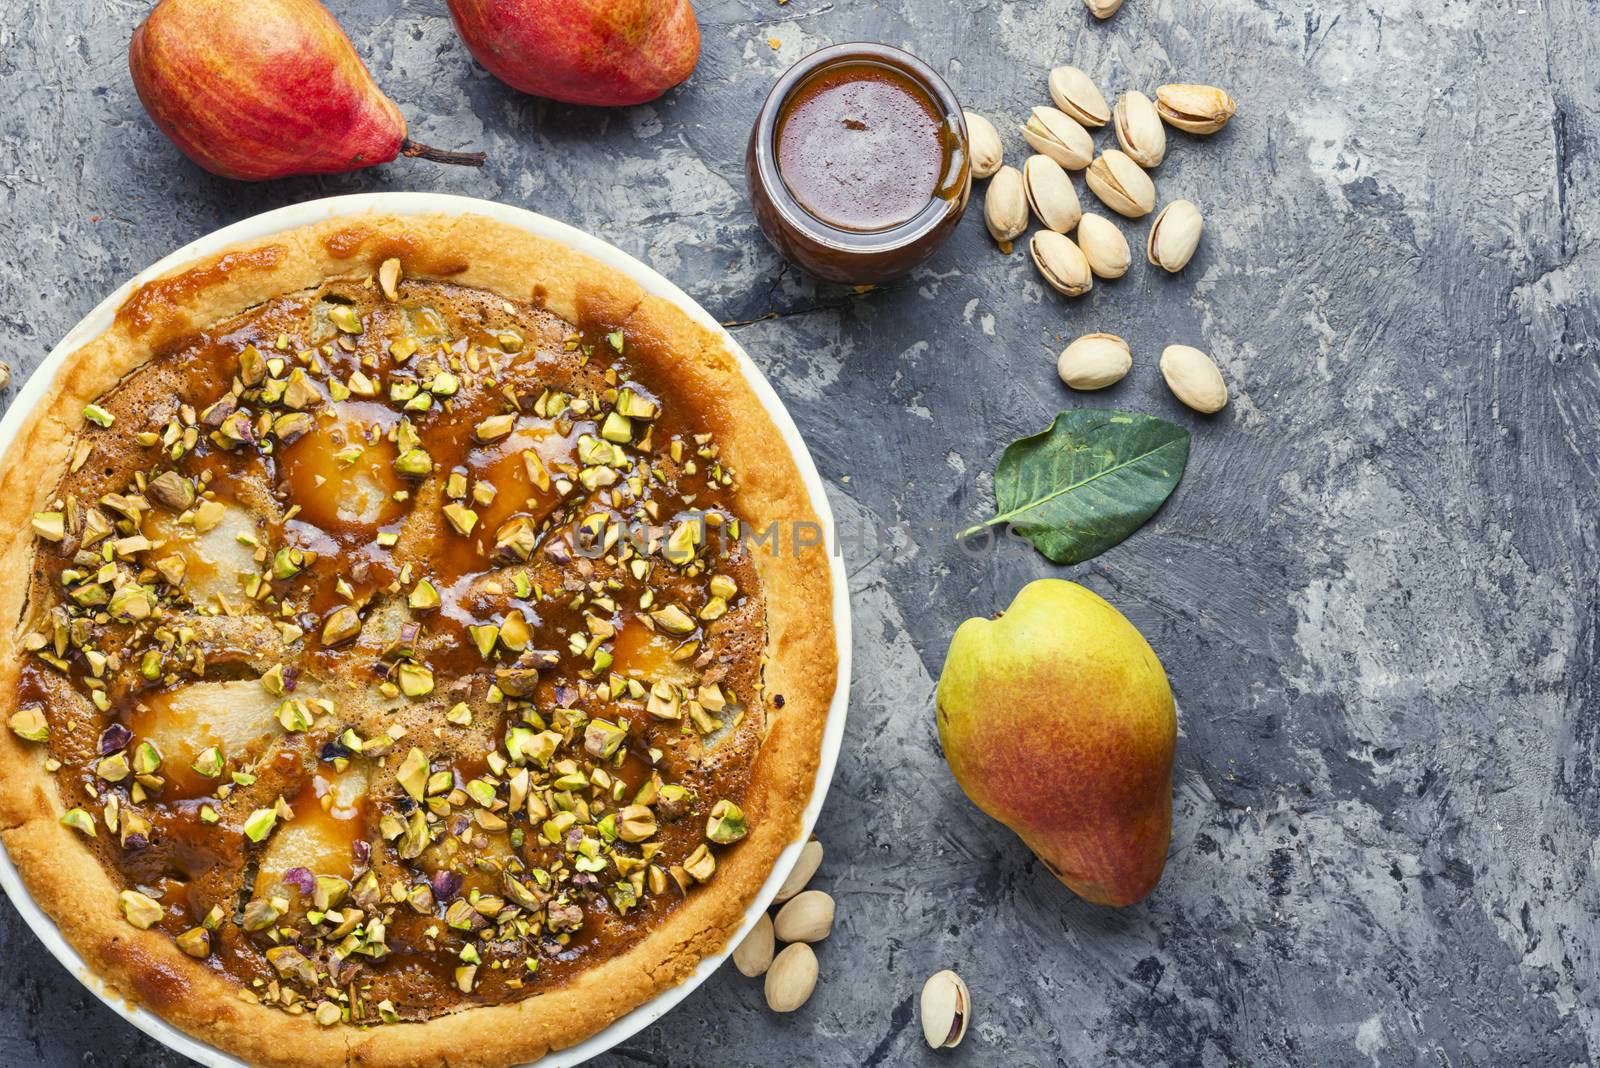 Autumn pie with pear and pistachio.Traditional autumn pie